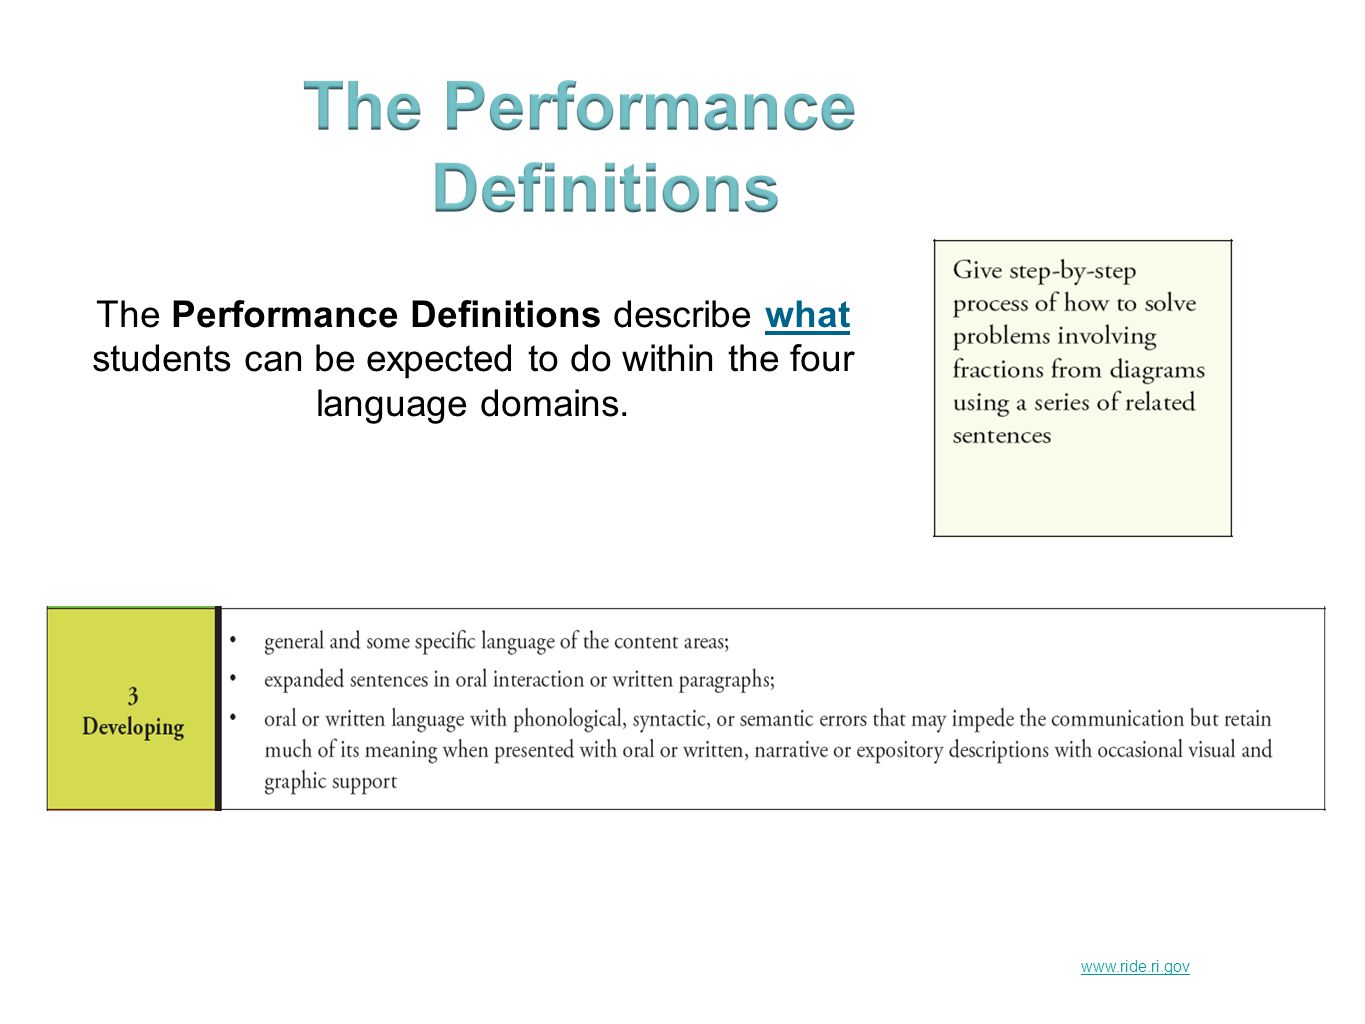 The Performance Definitions describe what students can be expected to do within the four language domains.